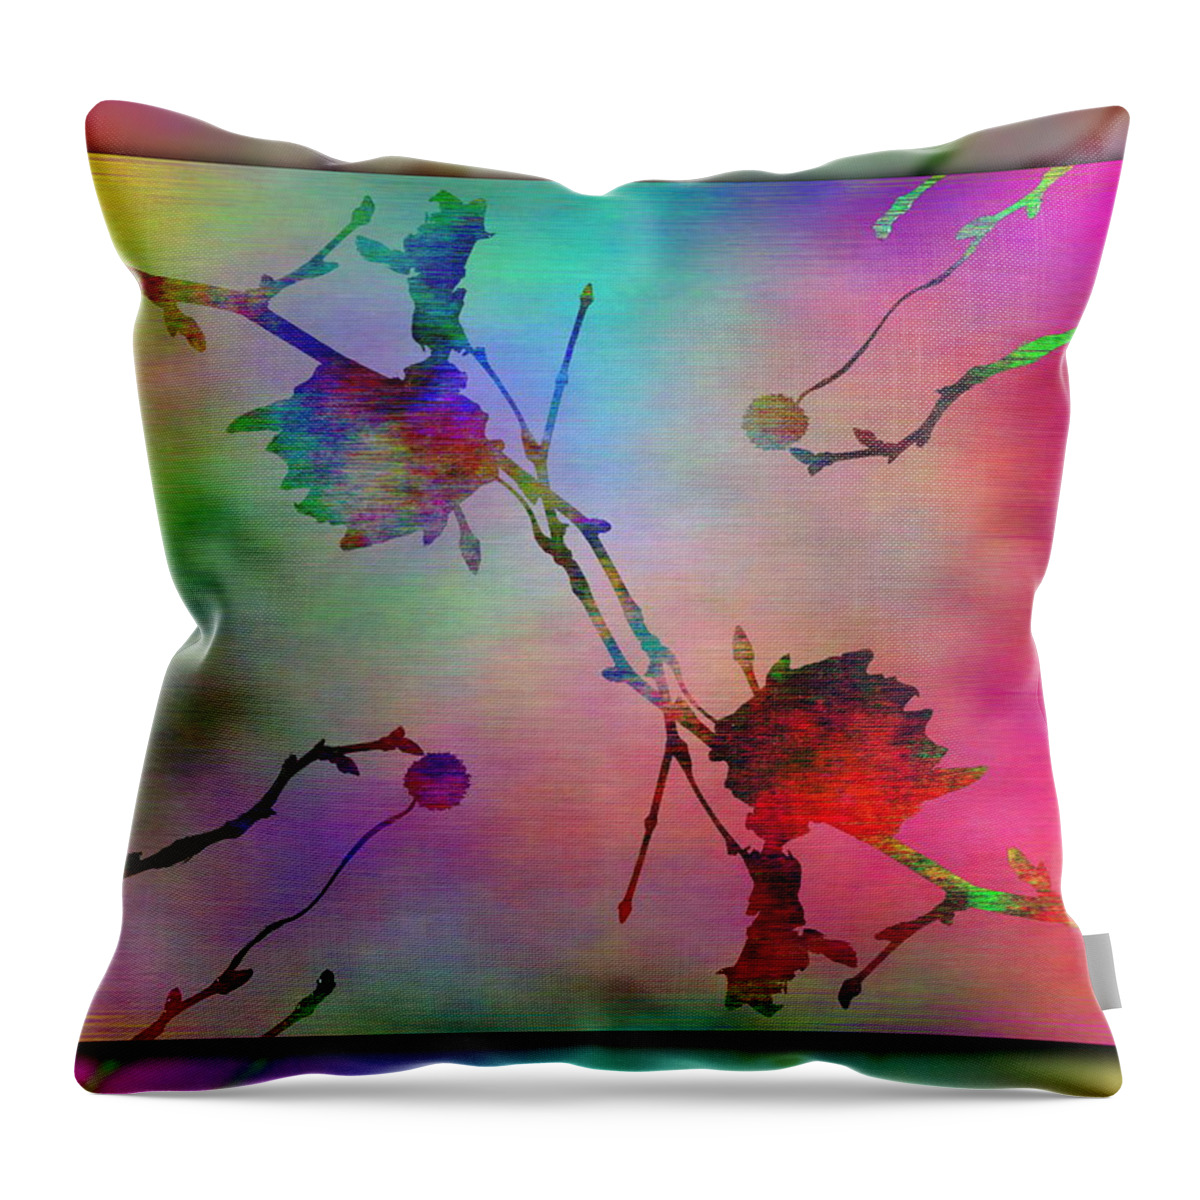 Abstract Throw Pillow featuring the digital art Branches In The Mist 26 by Tim Allen